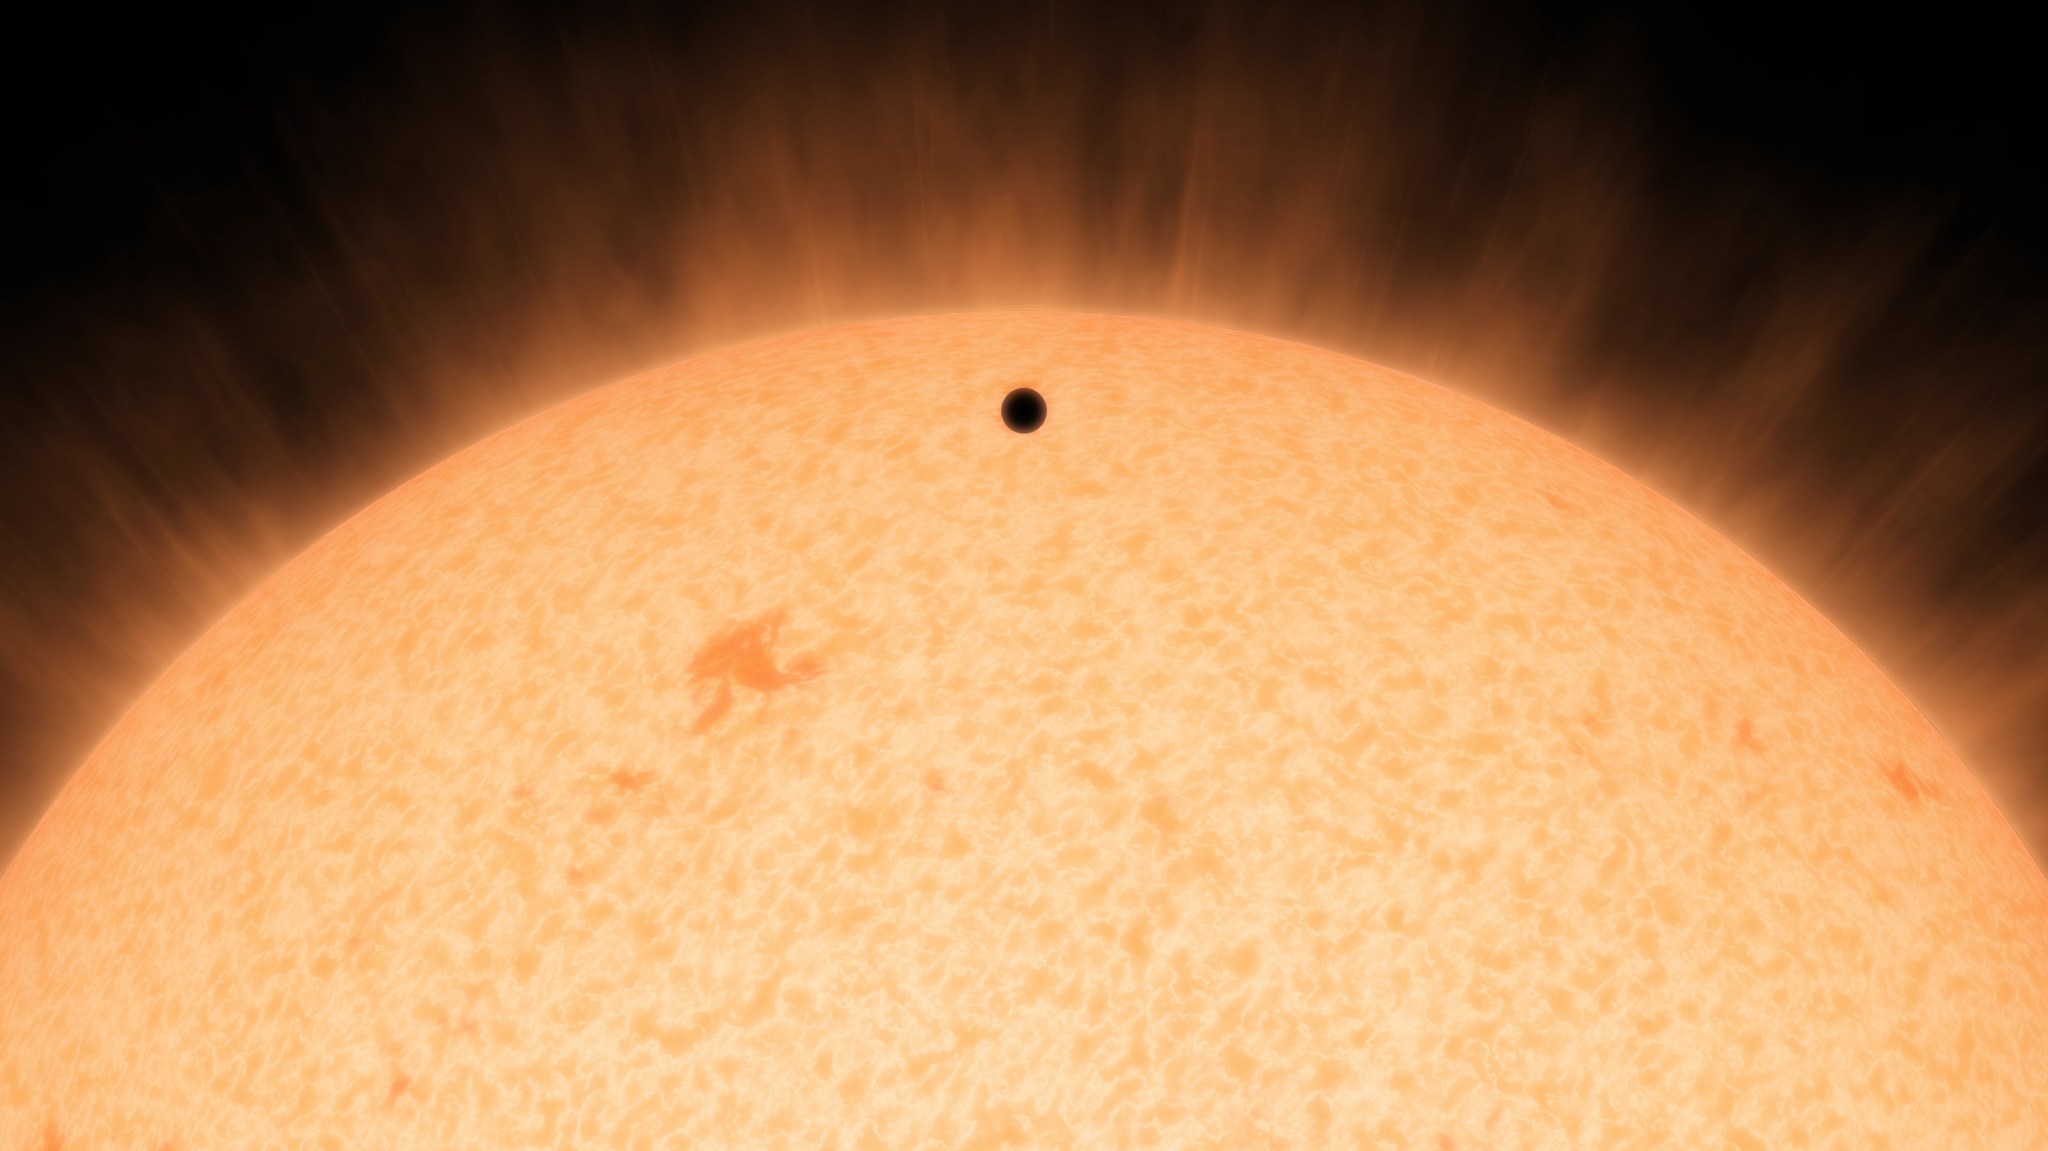 This artist's concept shows the silhouette of a rocky planet, dubbed HD 219134b